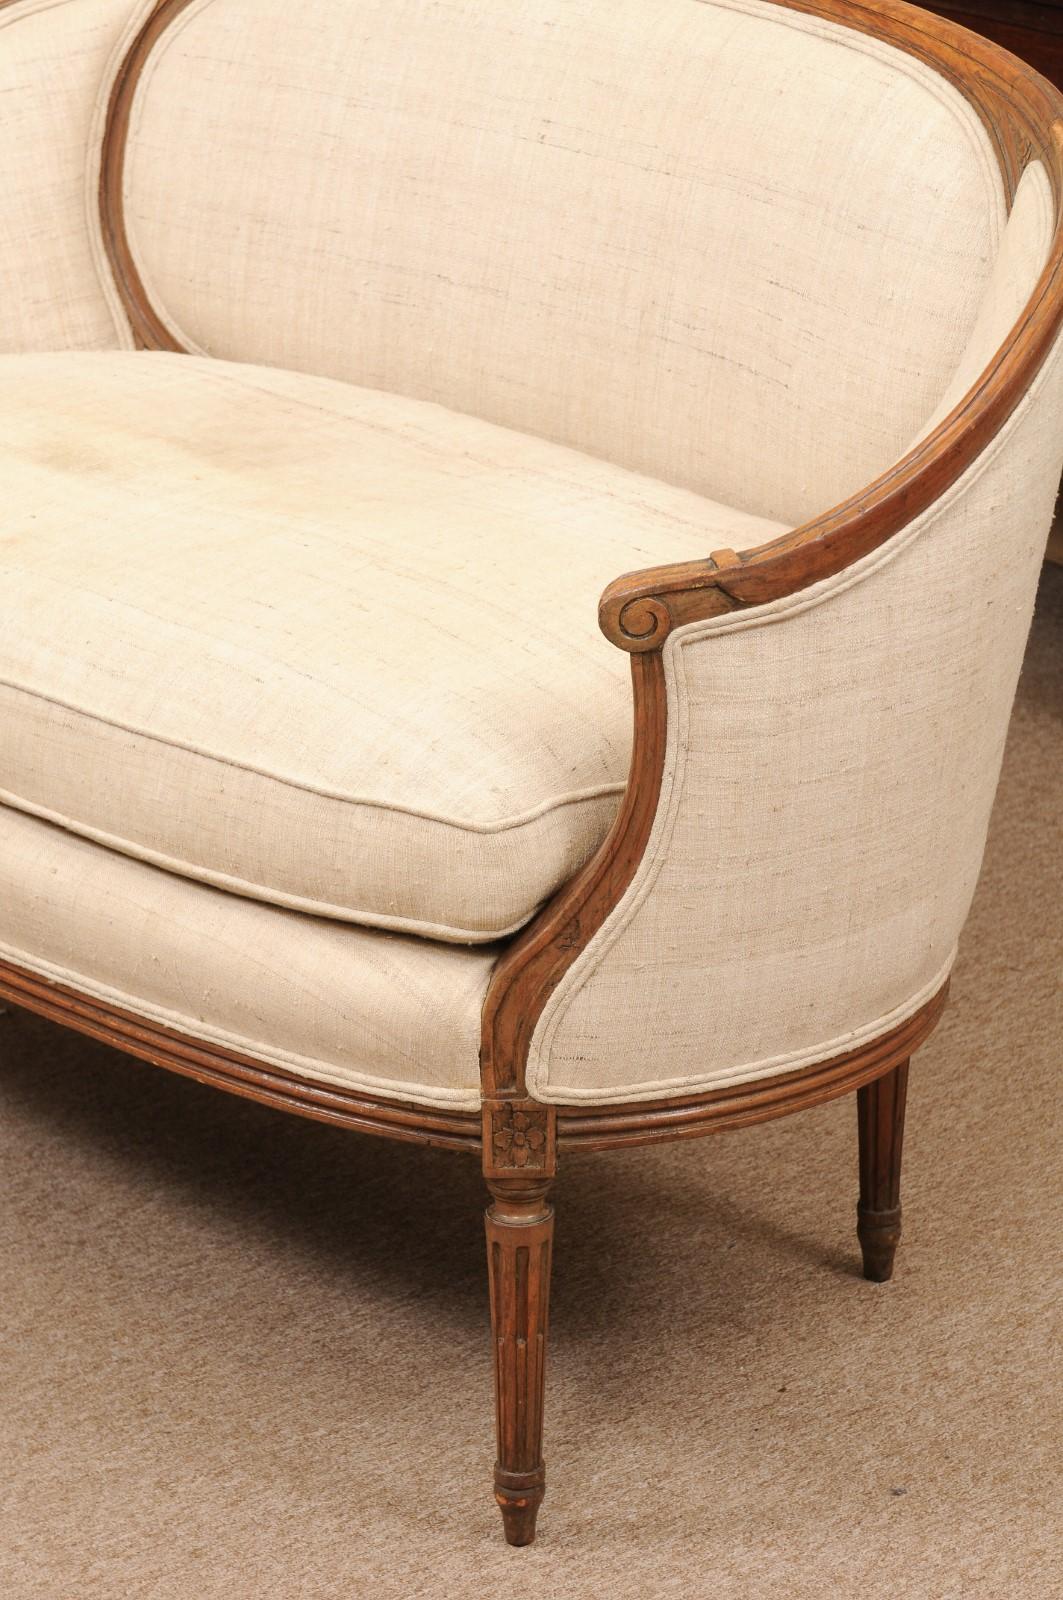 18th Century French Louis XVI Walnut Curved Back Settee / Love Seat For Sale 6